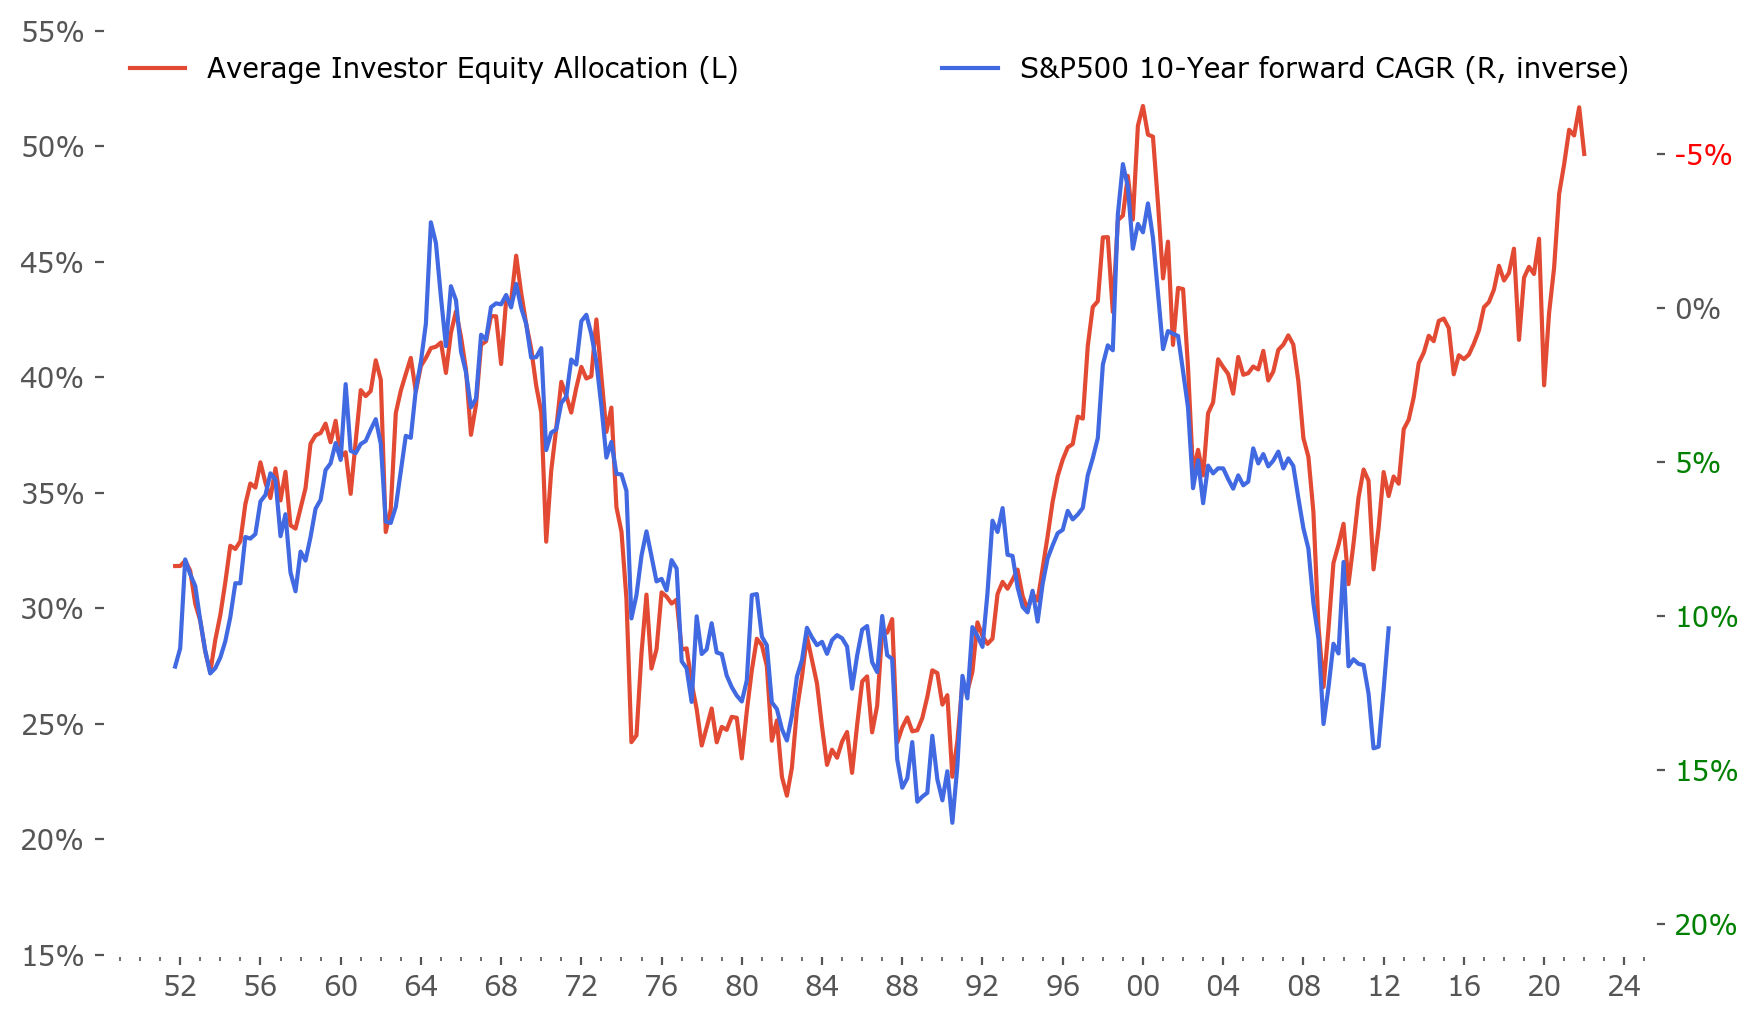 Average Equity Allocation of US investors, data from FRED